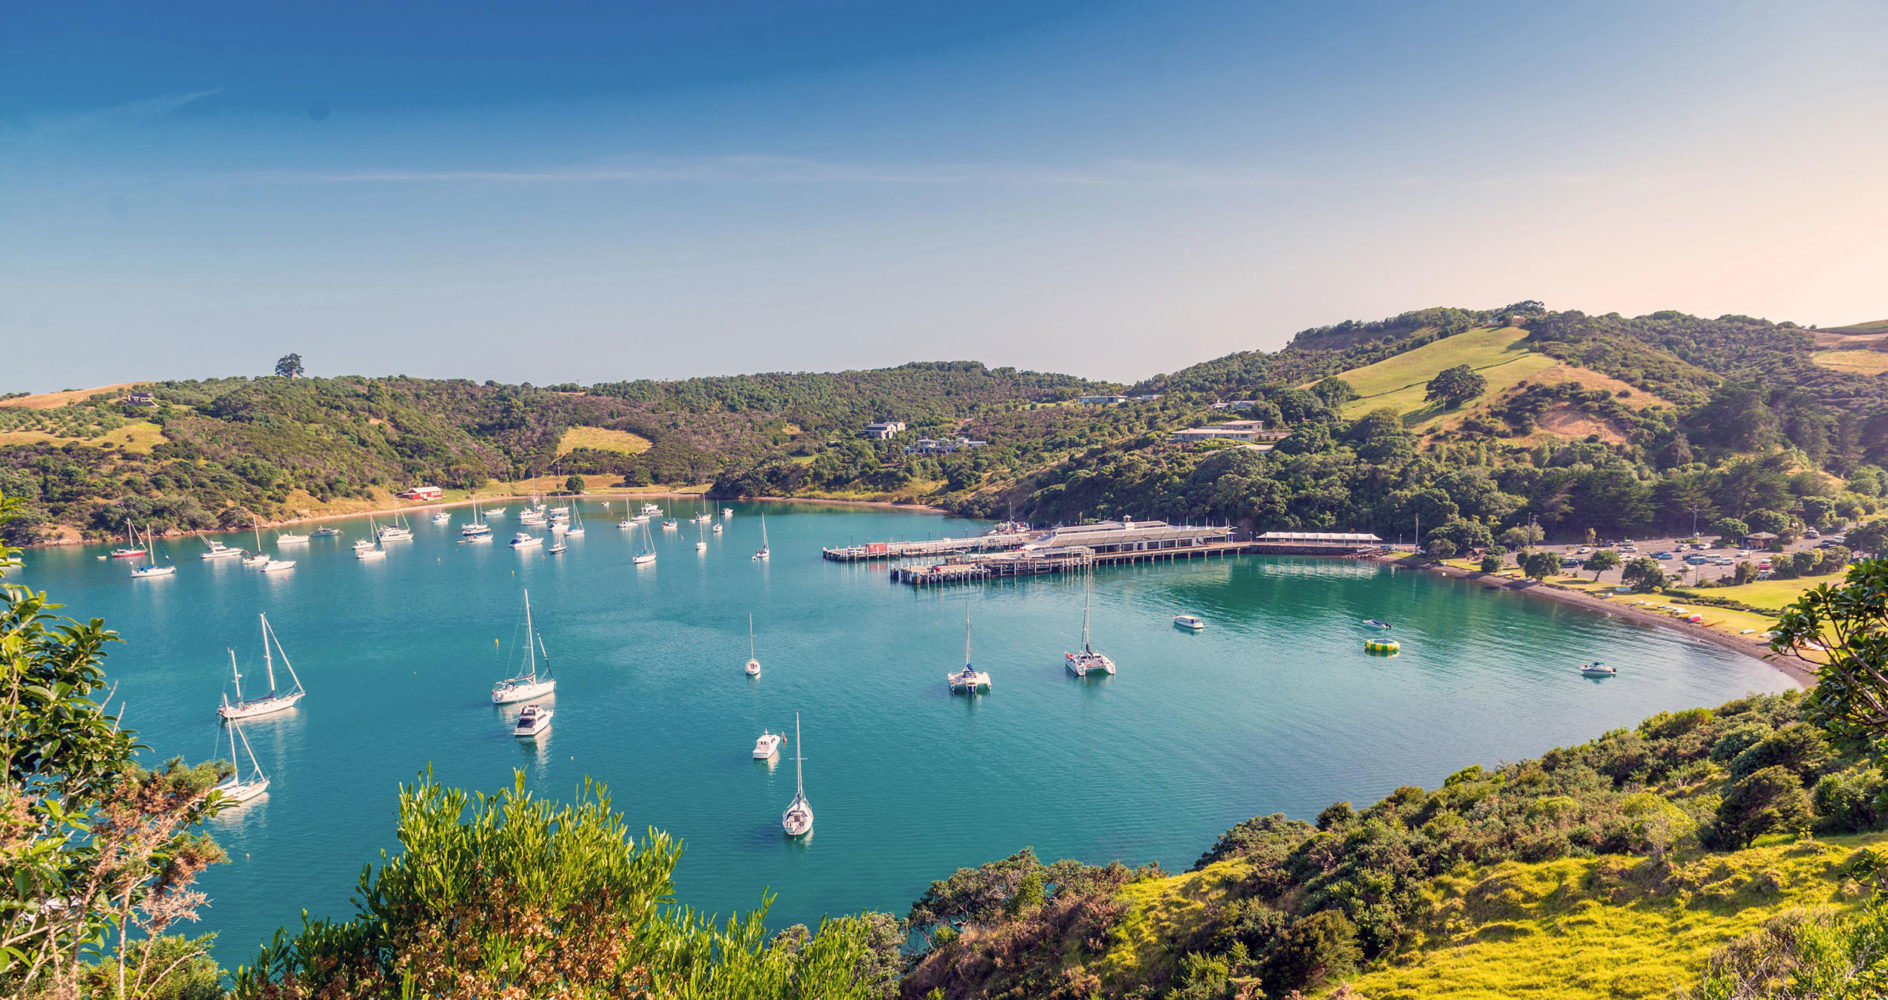 View of a bay and boats in it on Waiheke island